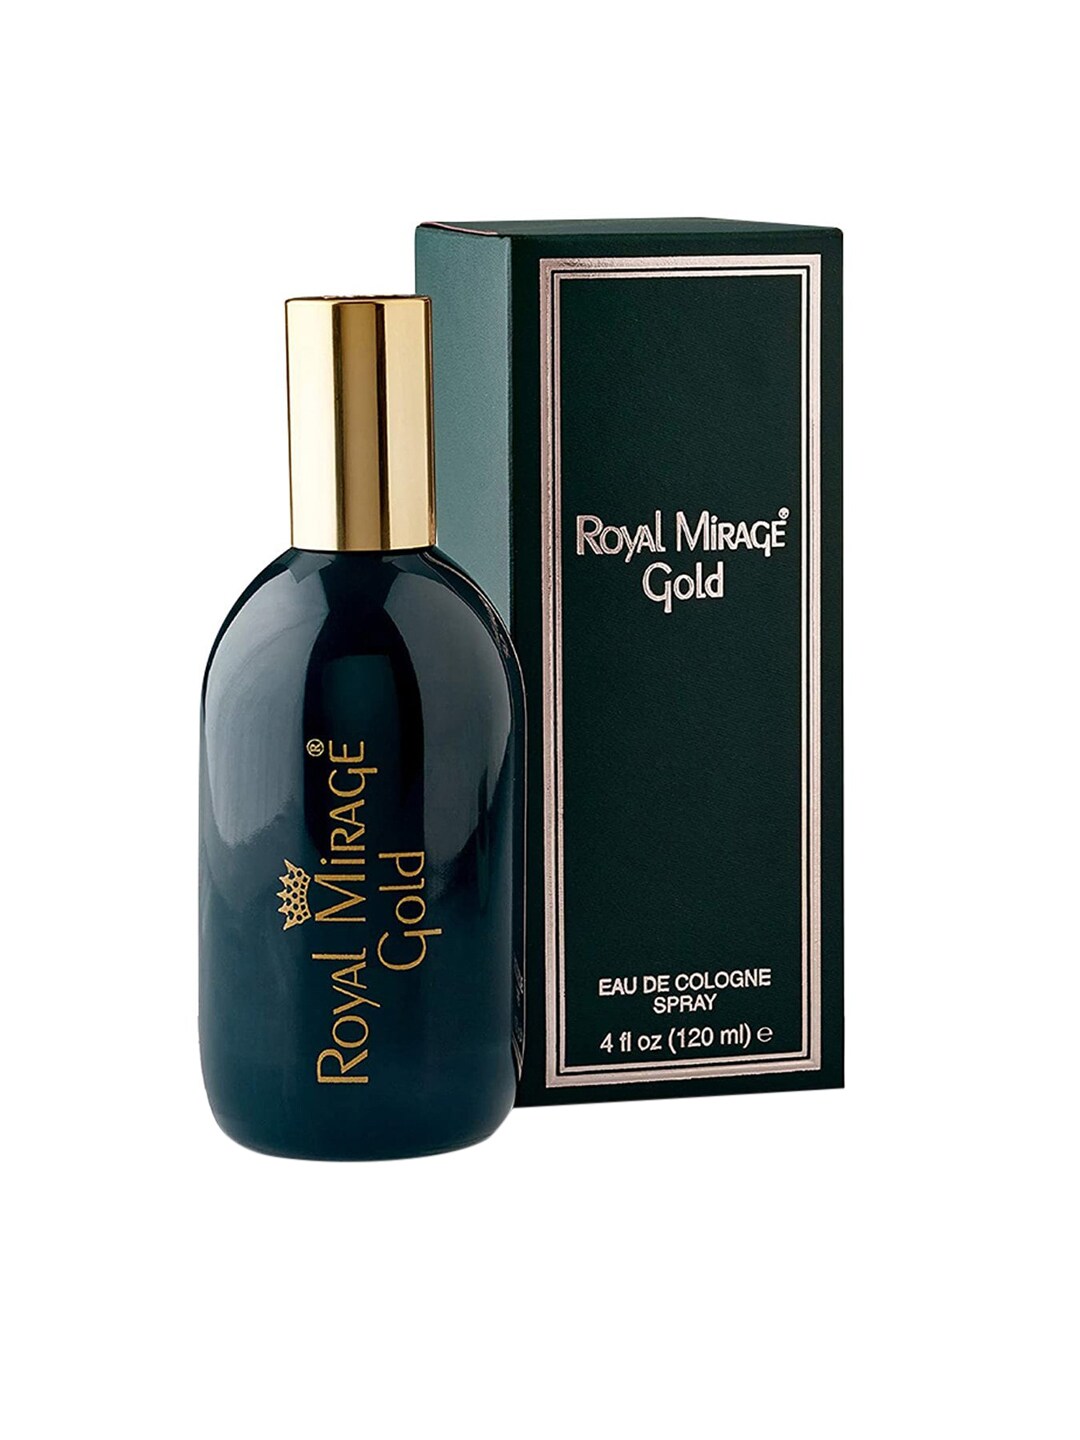 Royal Mirage Gold Eau De Cologne Perfume For Men 120ml Price in India